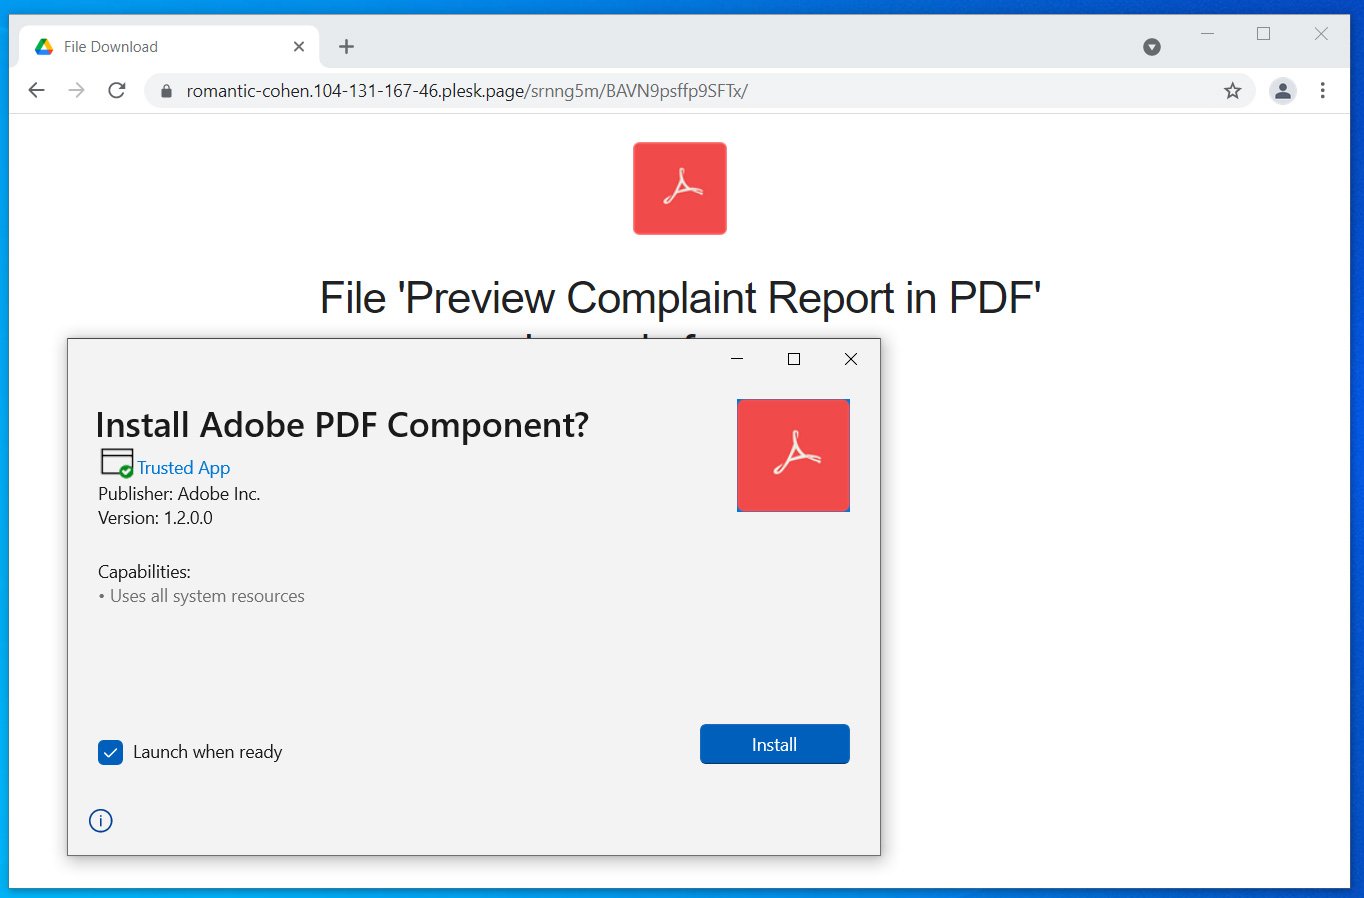 App Installer prompting to install a fake Adobe PDF Component